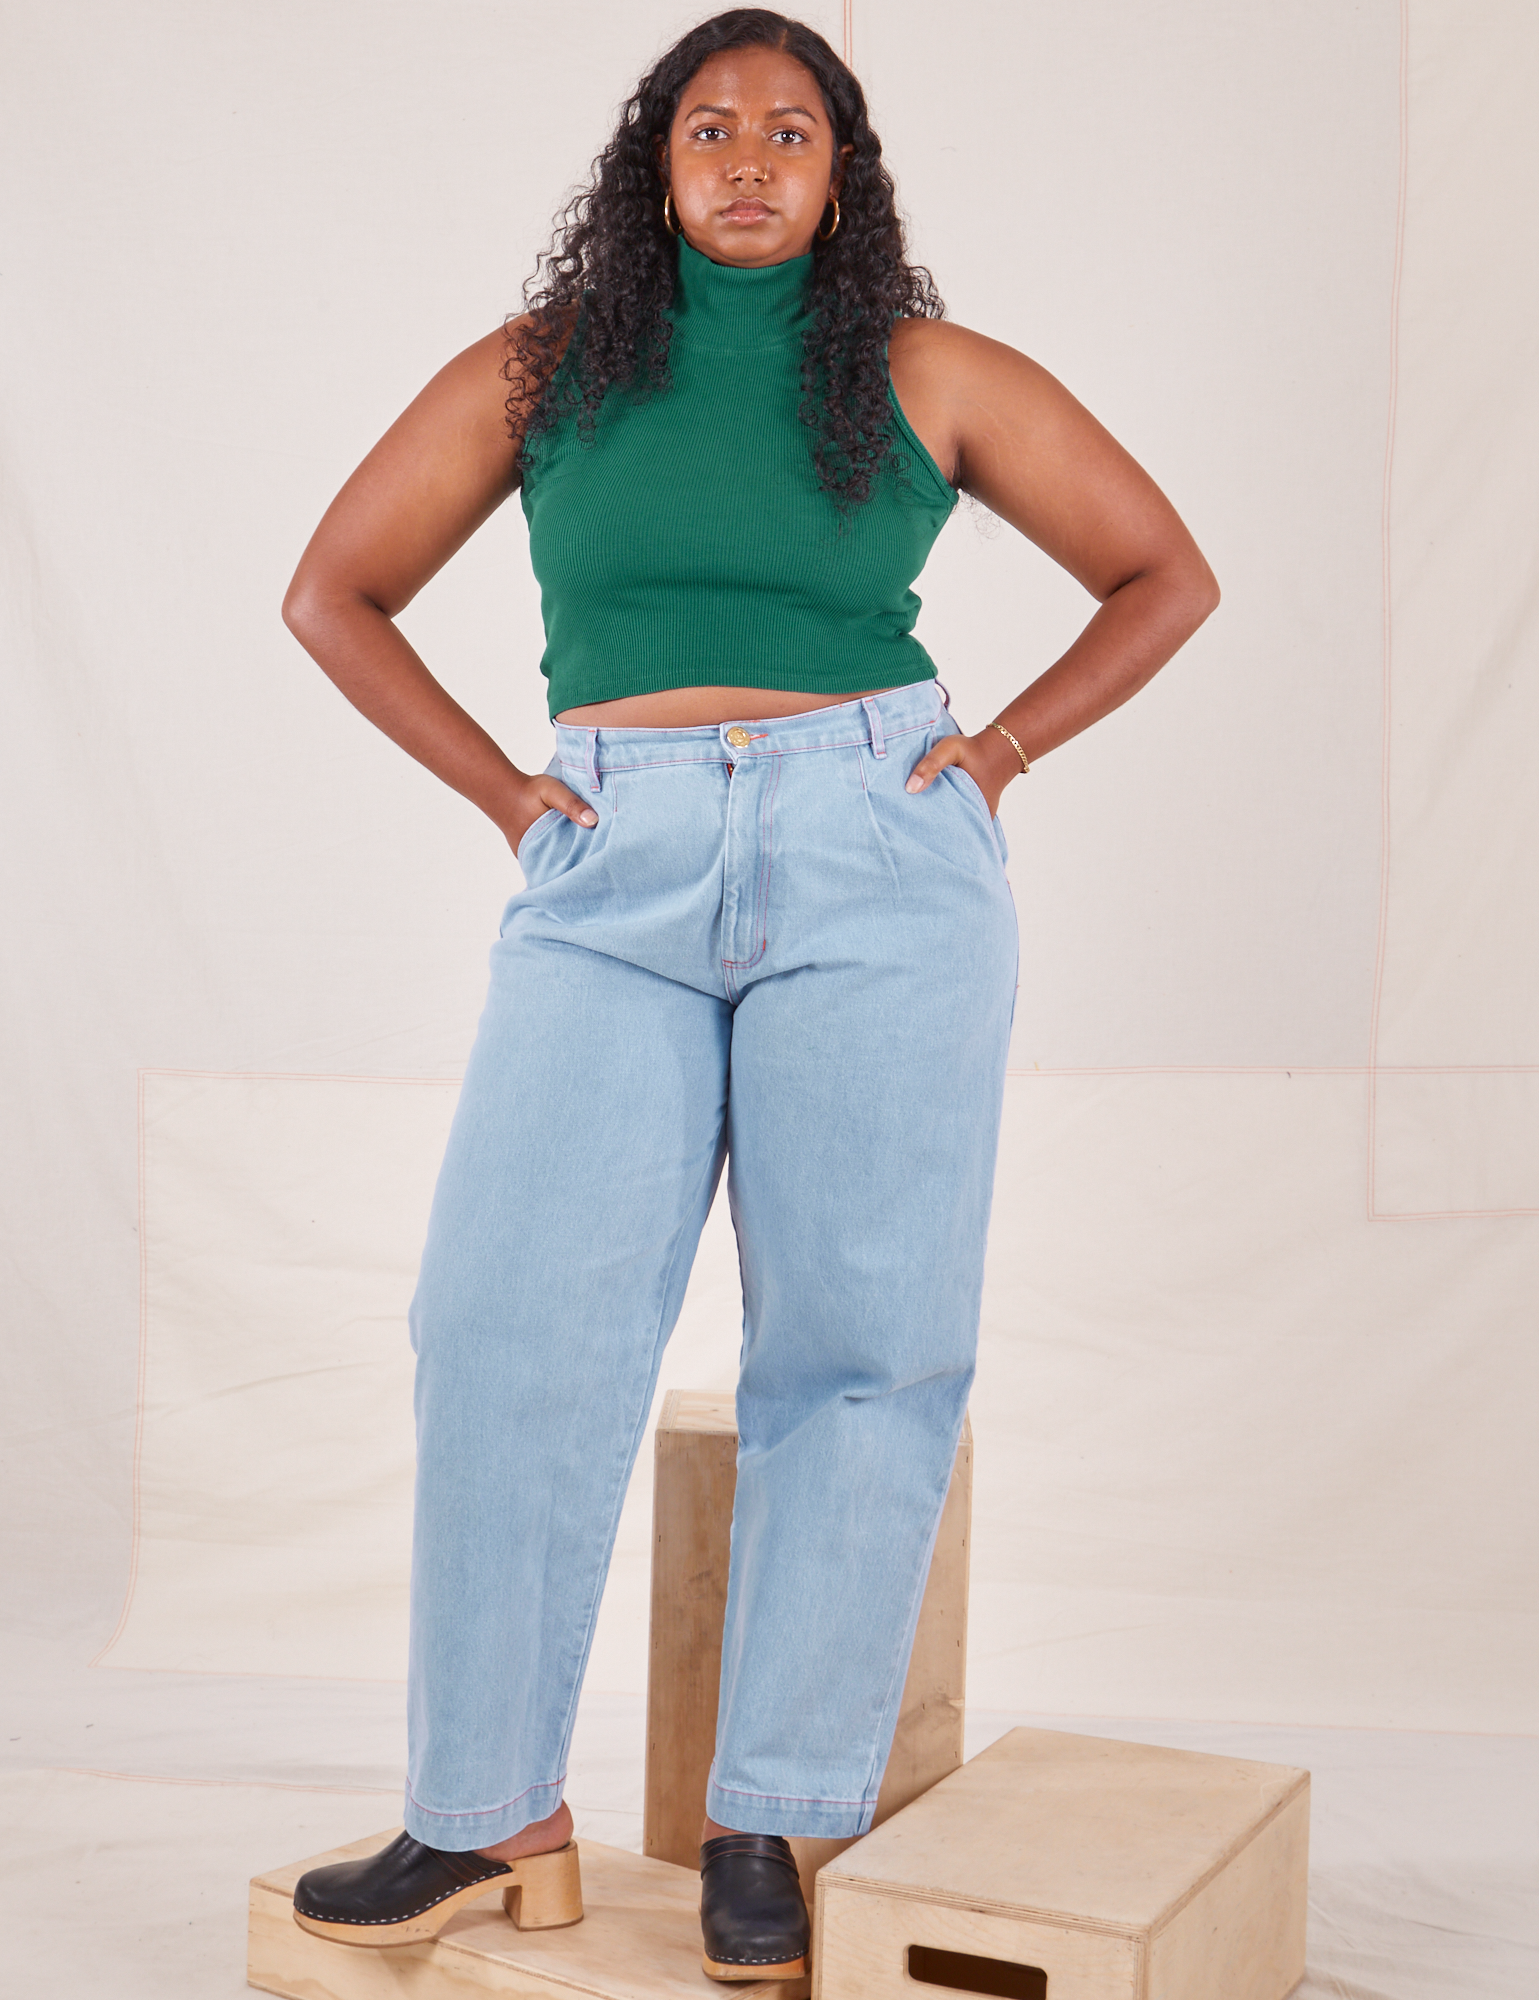 Meghna is 5'8" and wearing XS Sleeveless Essential Turtleneck in Hunter Green paired with light wash Denim Trousers